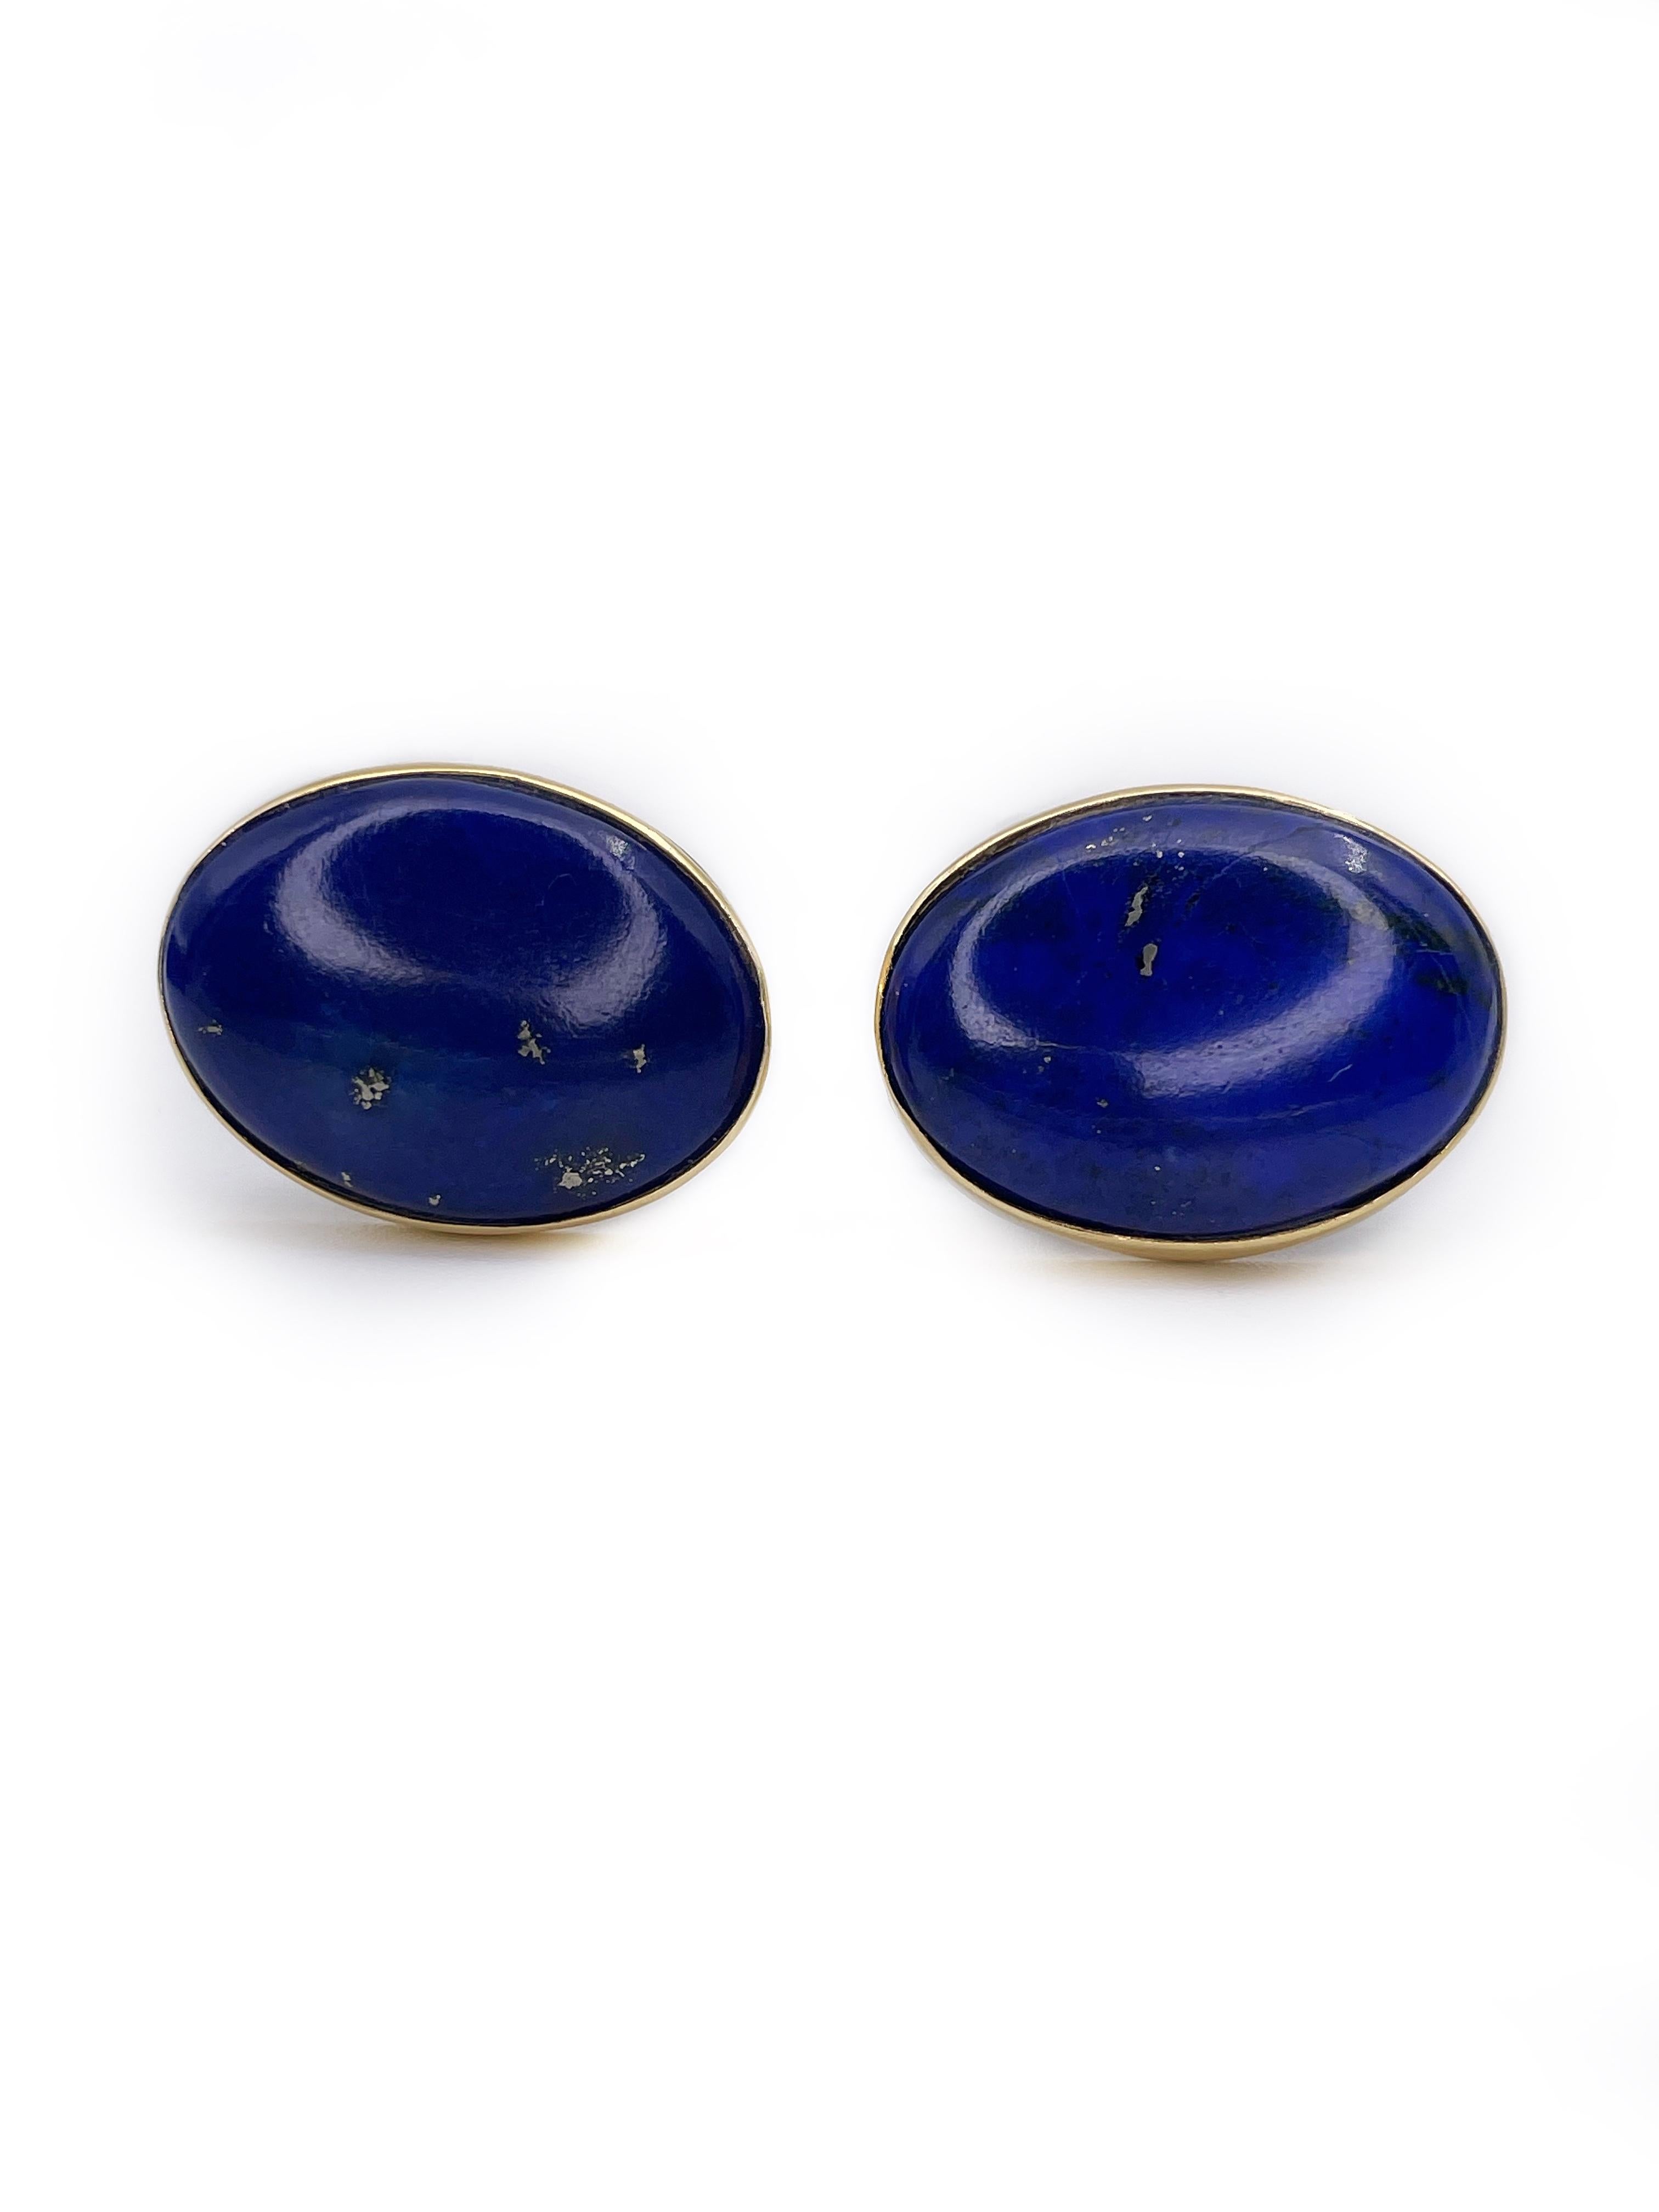 This is a vintage pair of stud earrings crafted in 18K yellow gold. The piece features two beautiful oval cabochon cut lapis lazuli, which in total weight 10.70ct.

Weight: 6.82g
Size: 1.9x1.4cm

———

If you have any questions, please feel free to